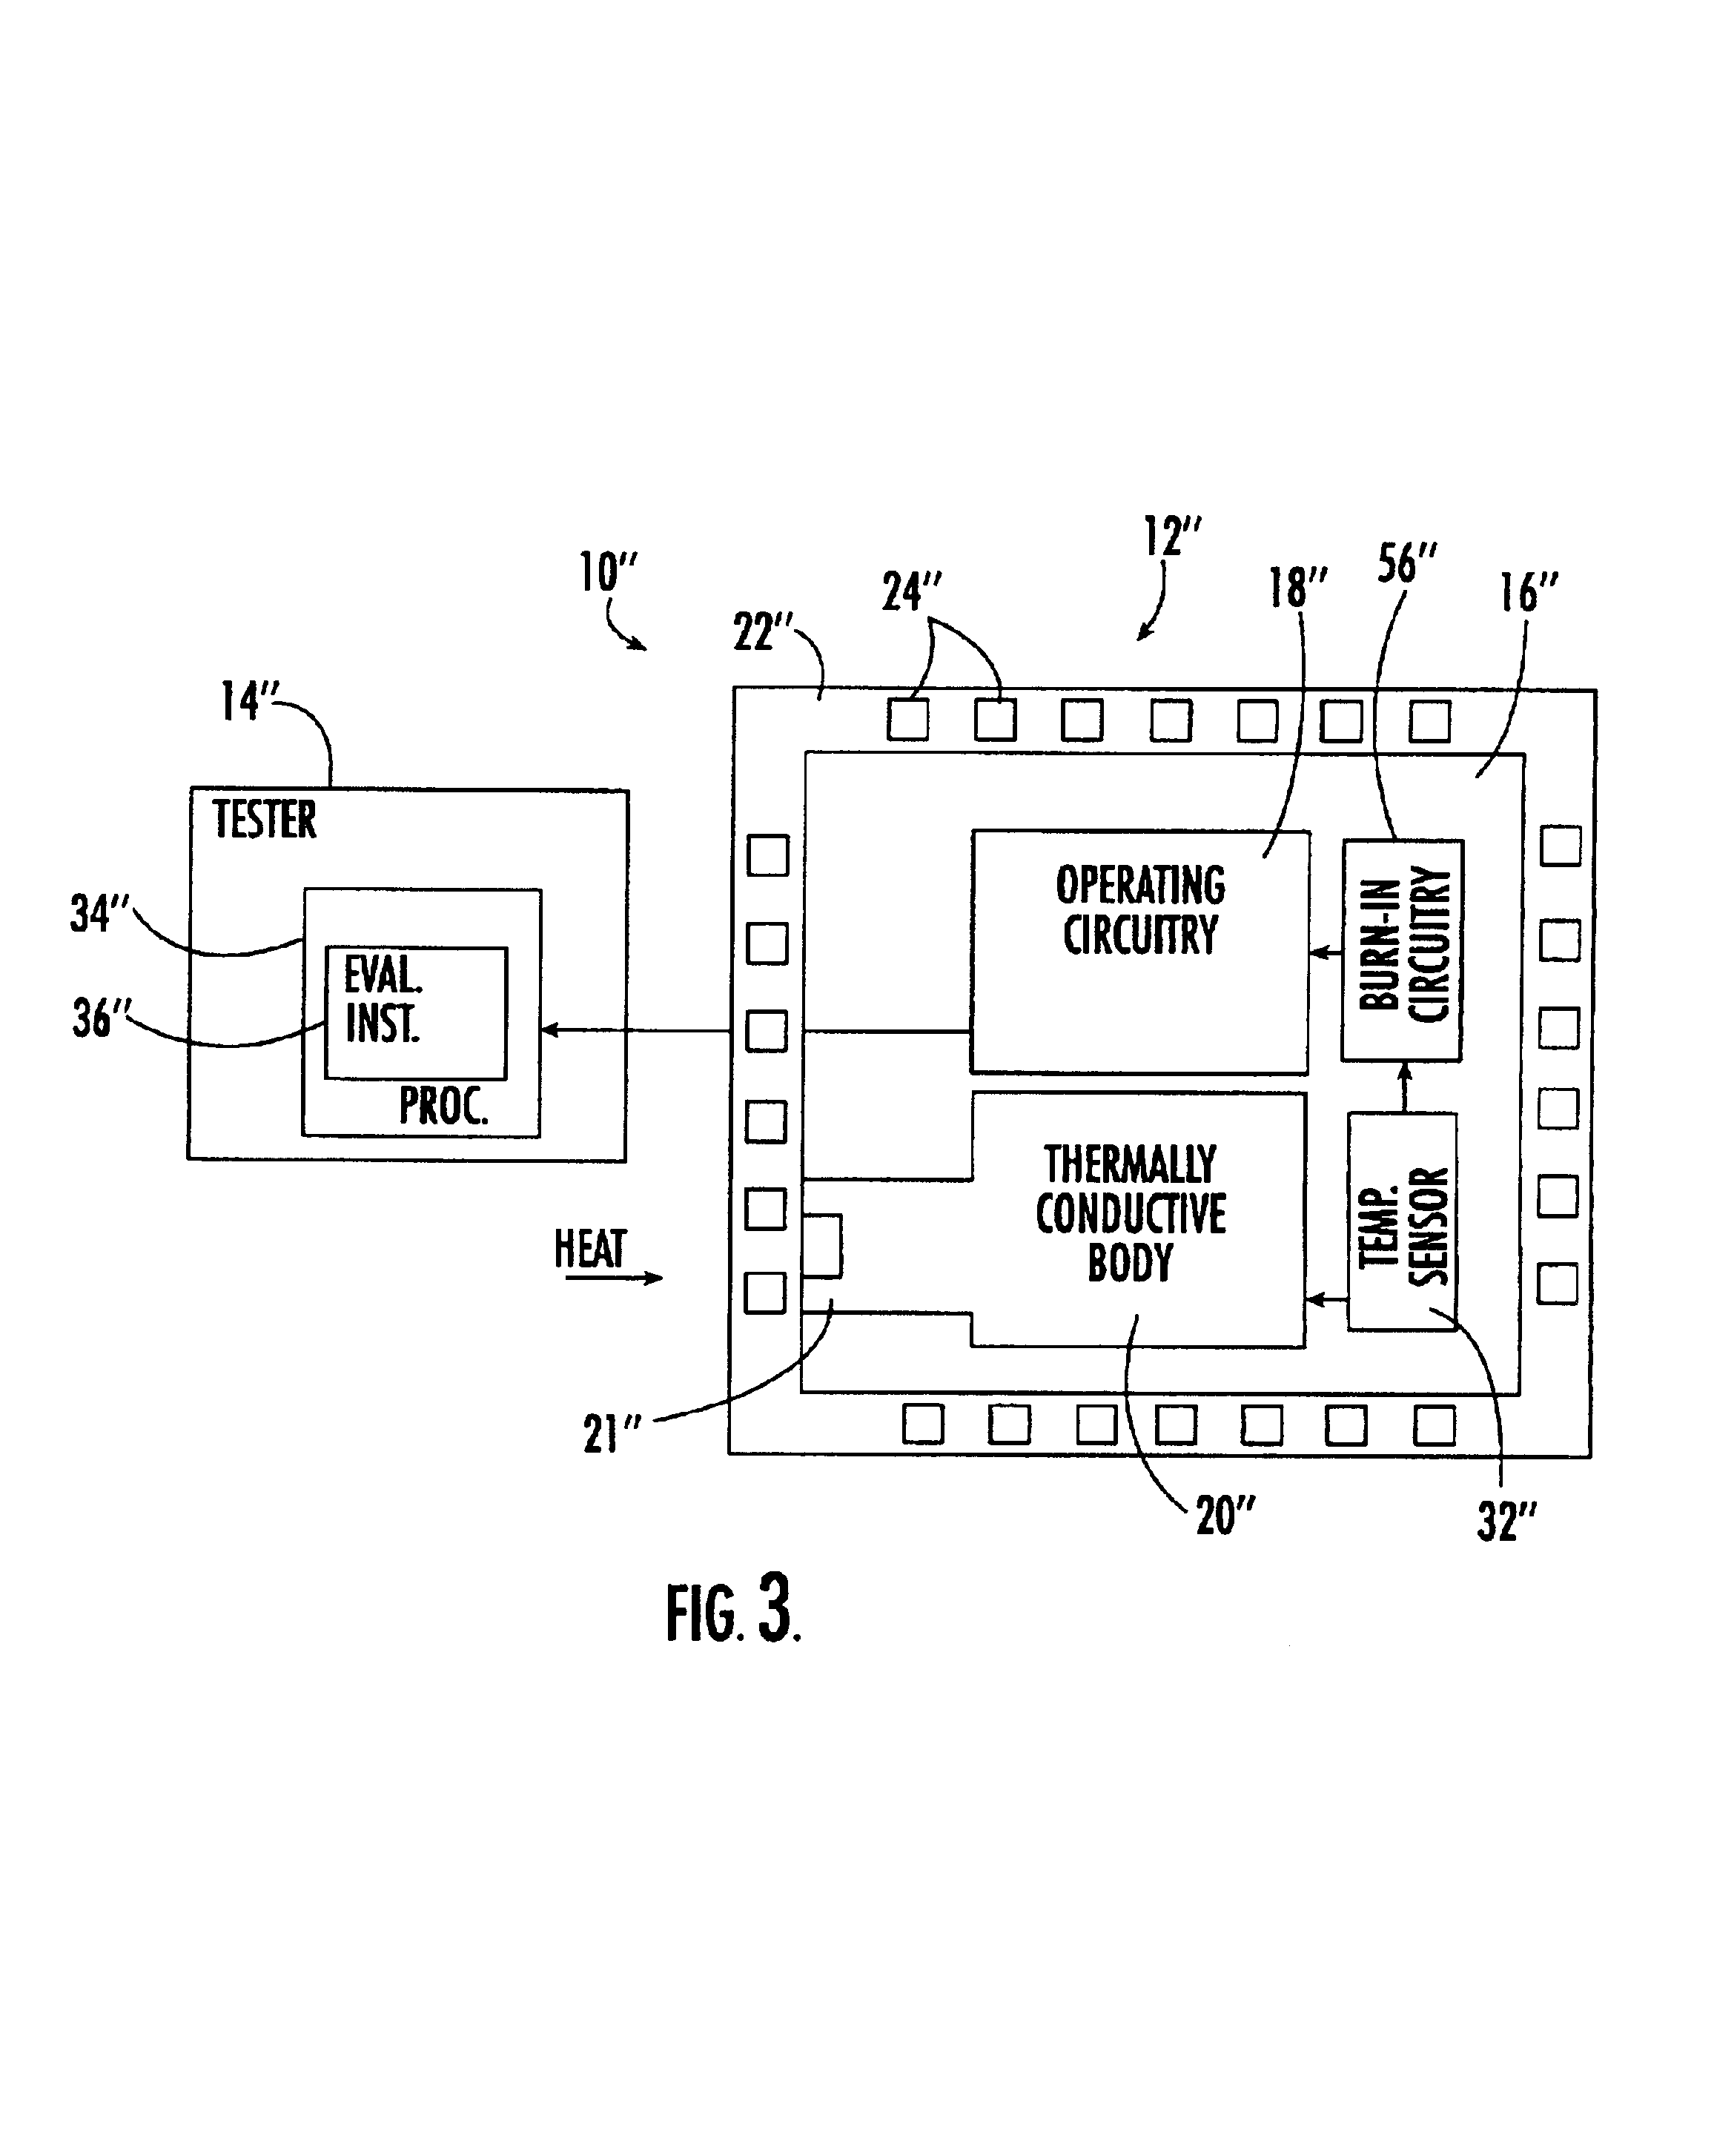 Integrated circuit burn-in test system and associated methods